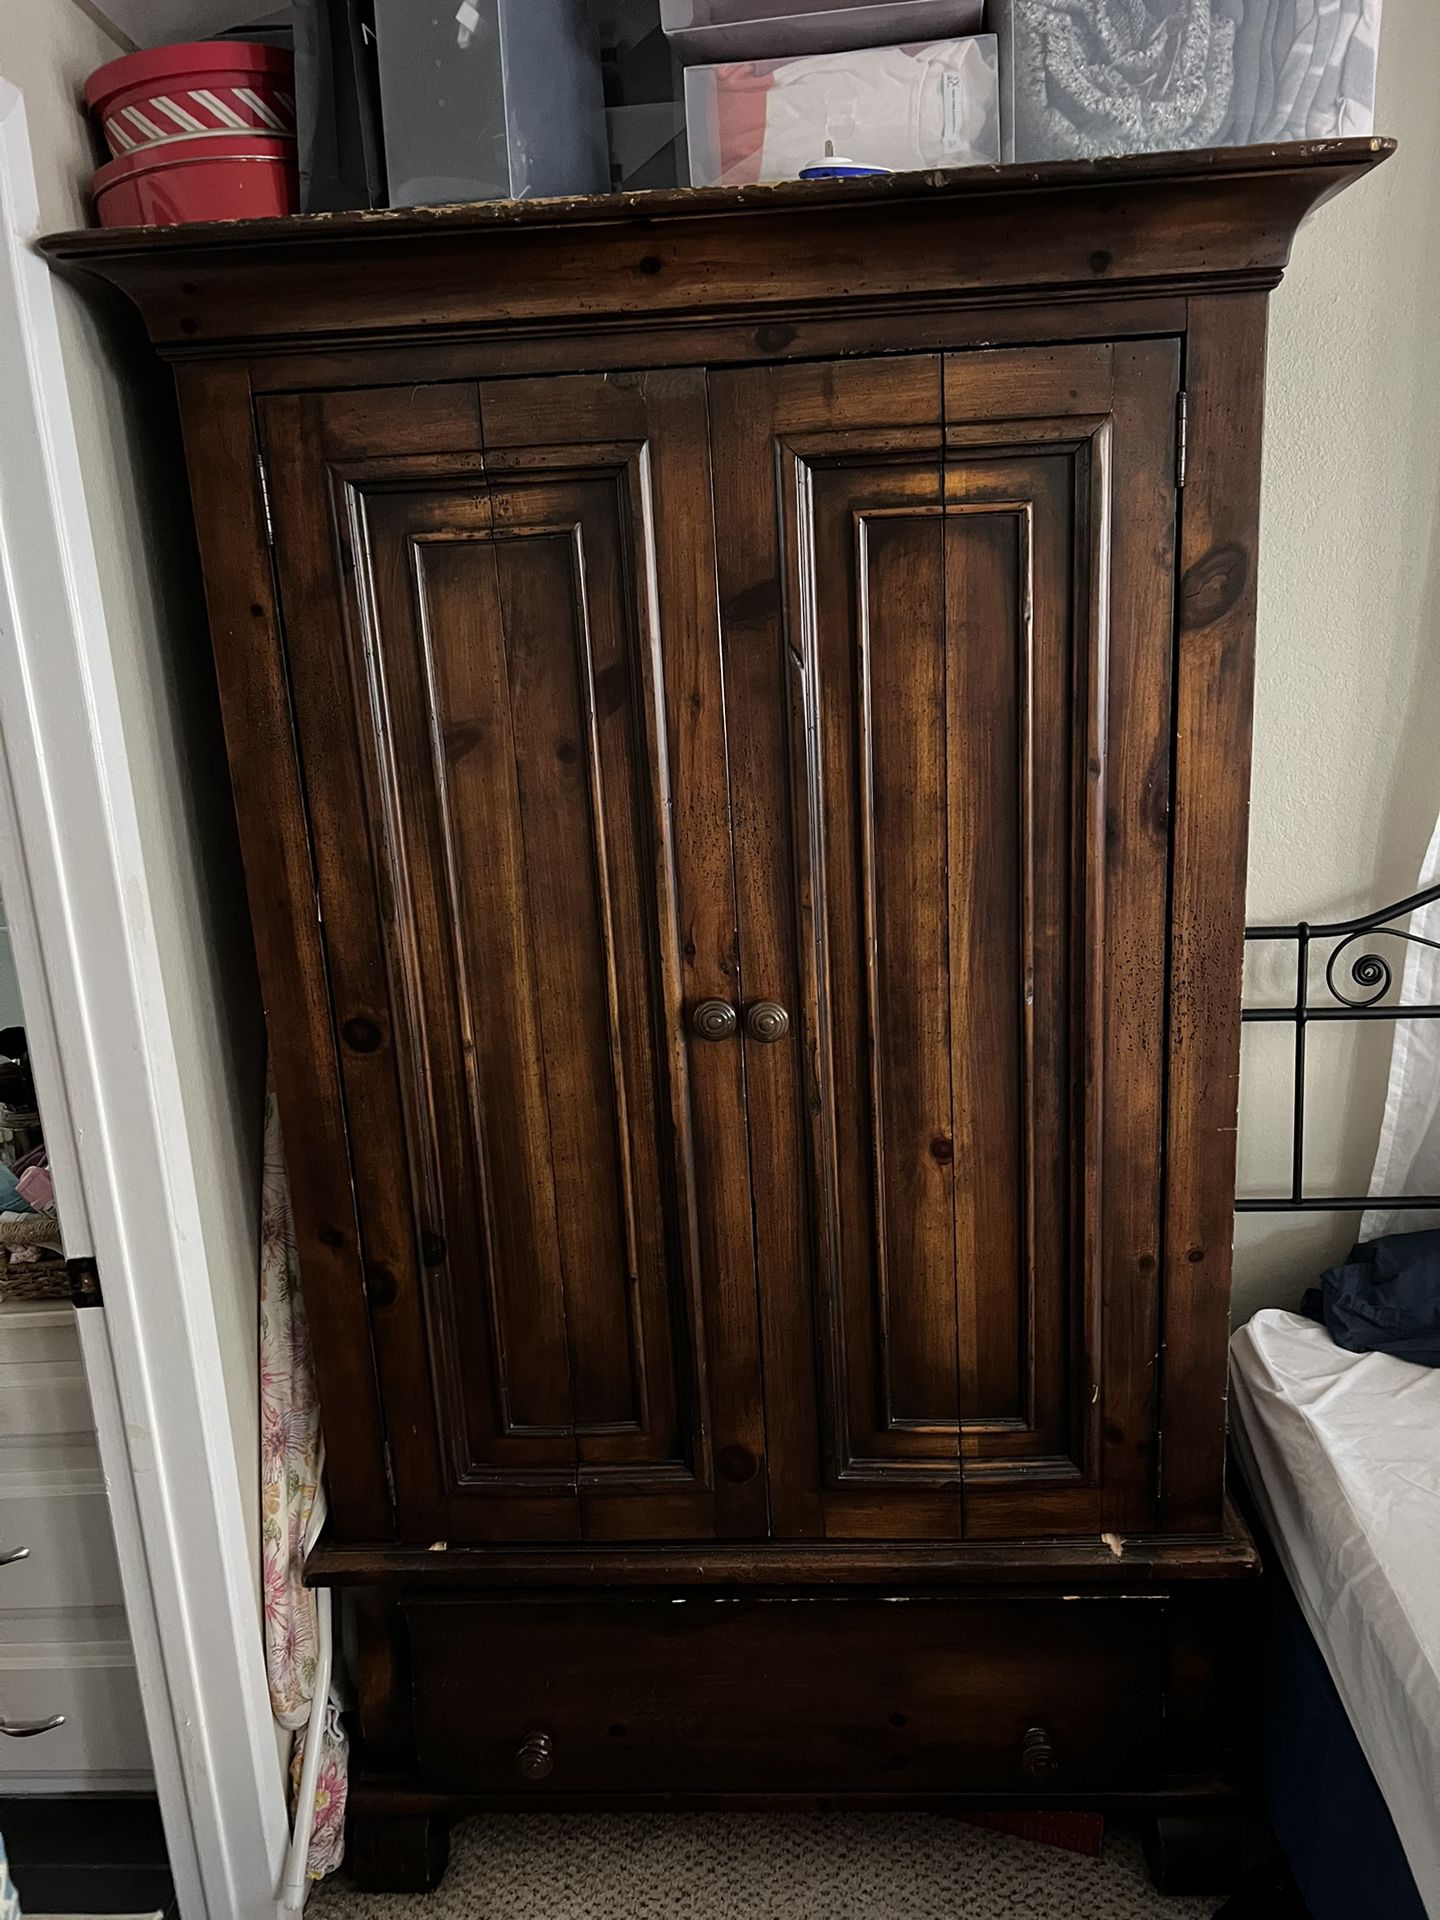 Armoire Solid Wood 